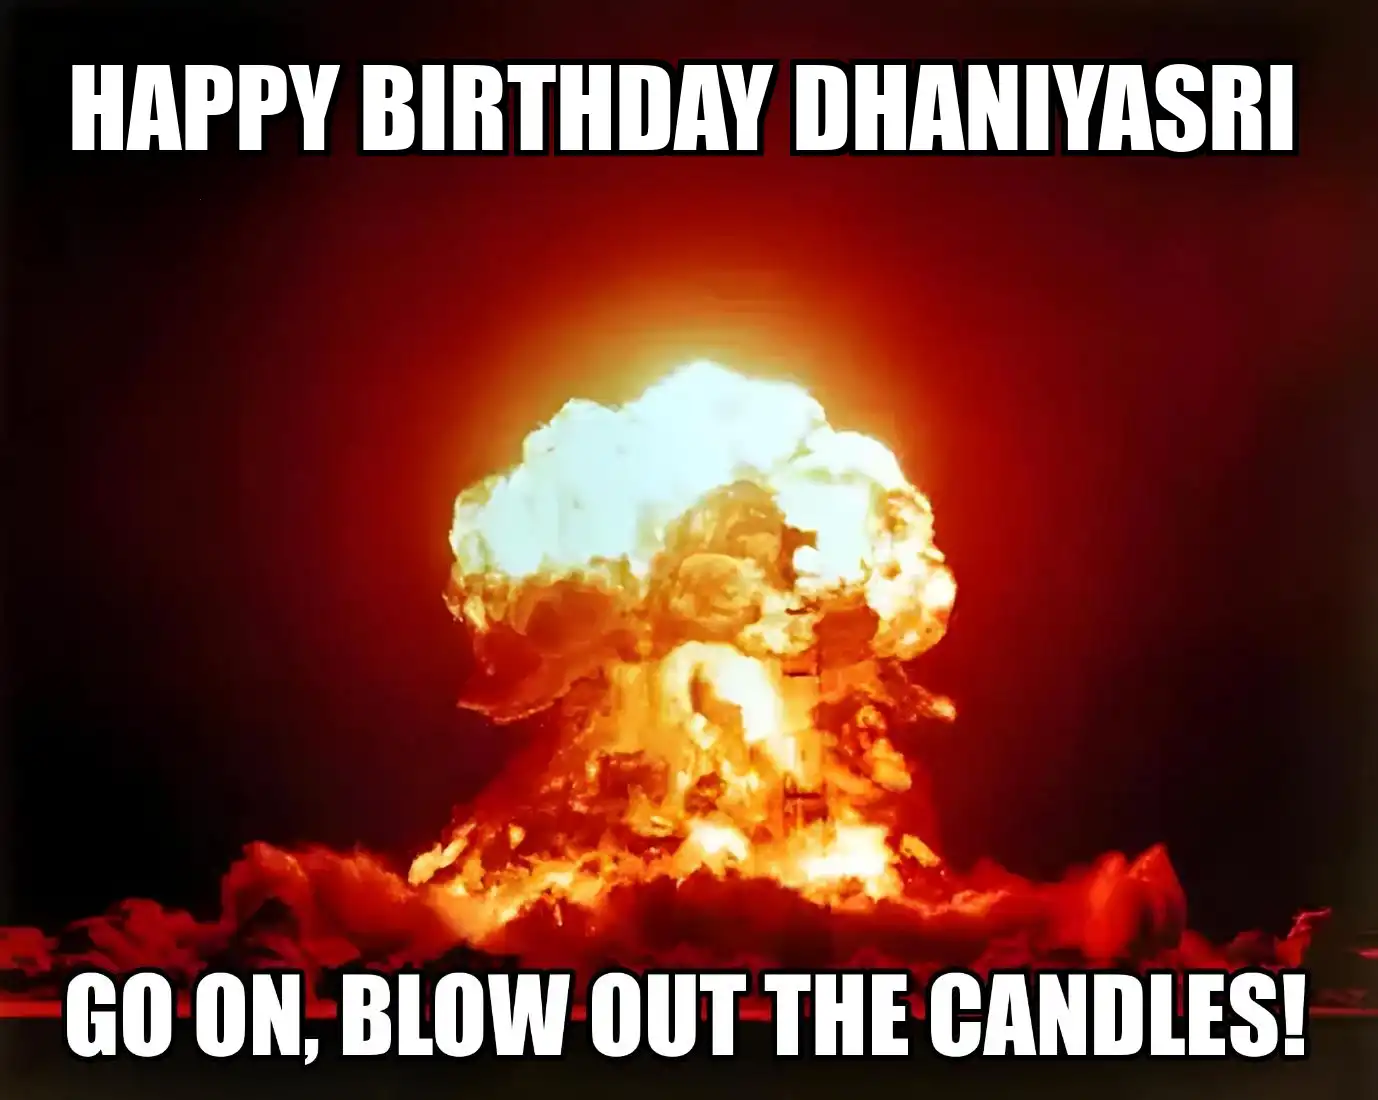 Happy Birthday Dhaniyasri Go On Blow Out The Candles Meme